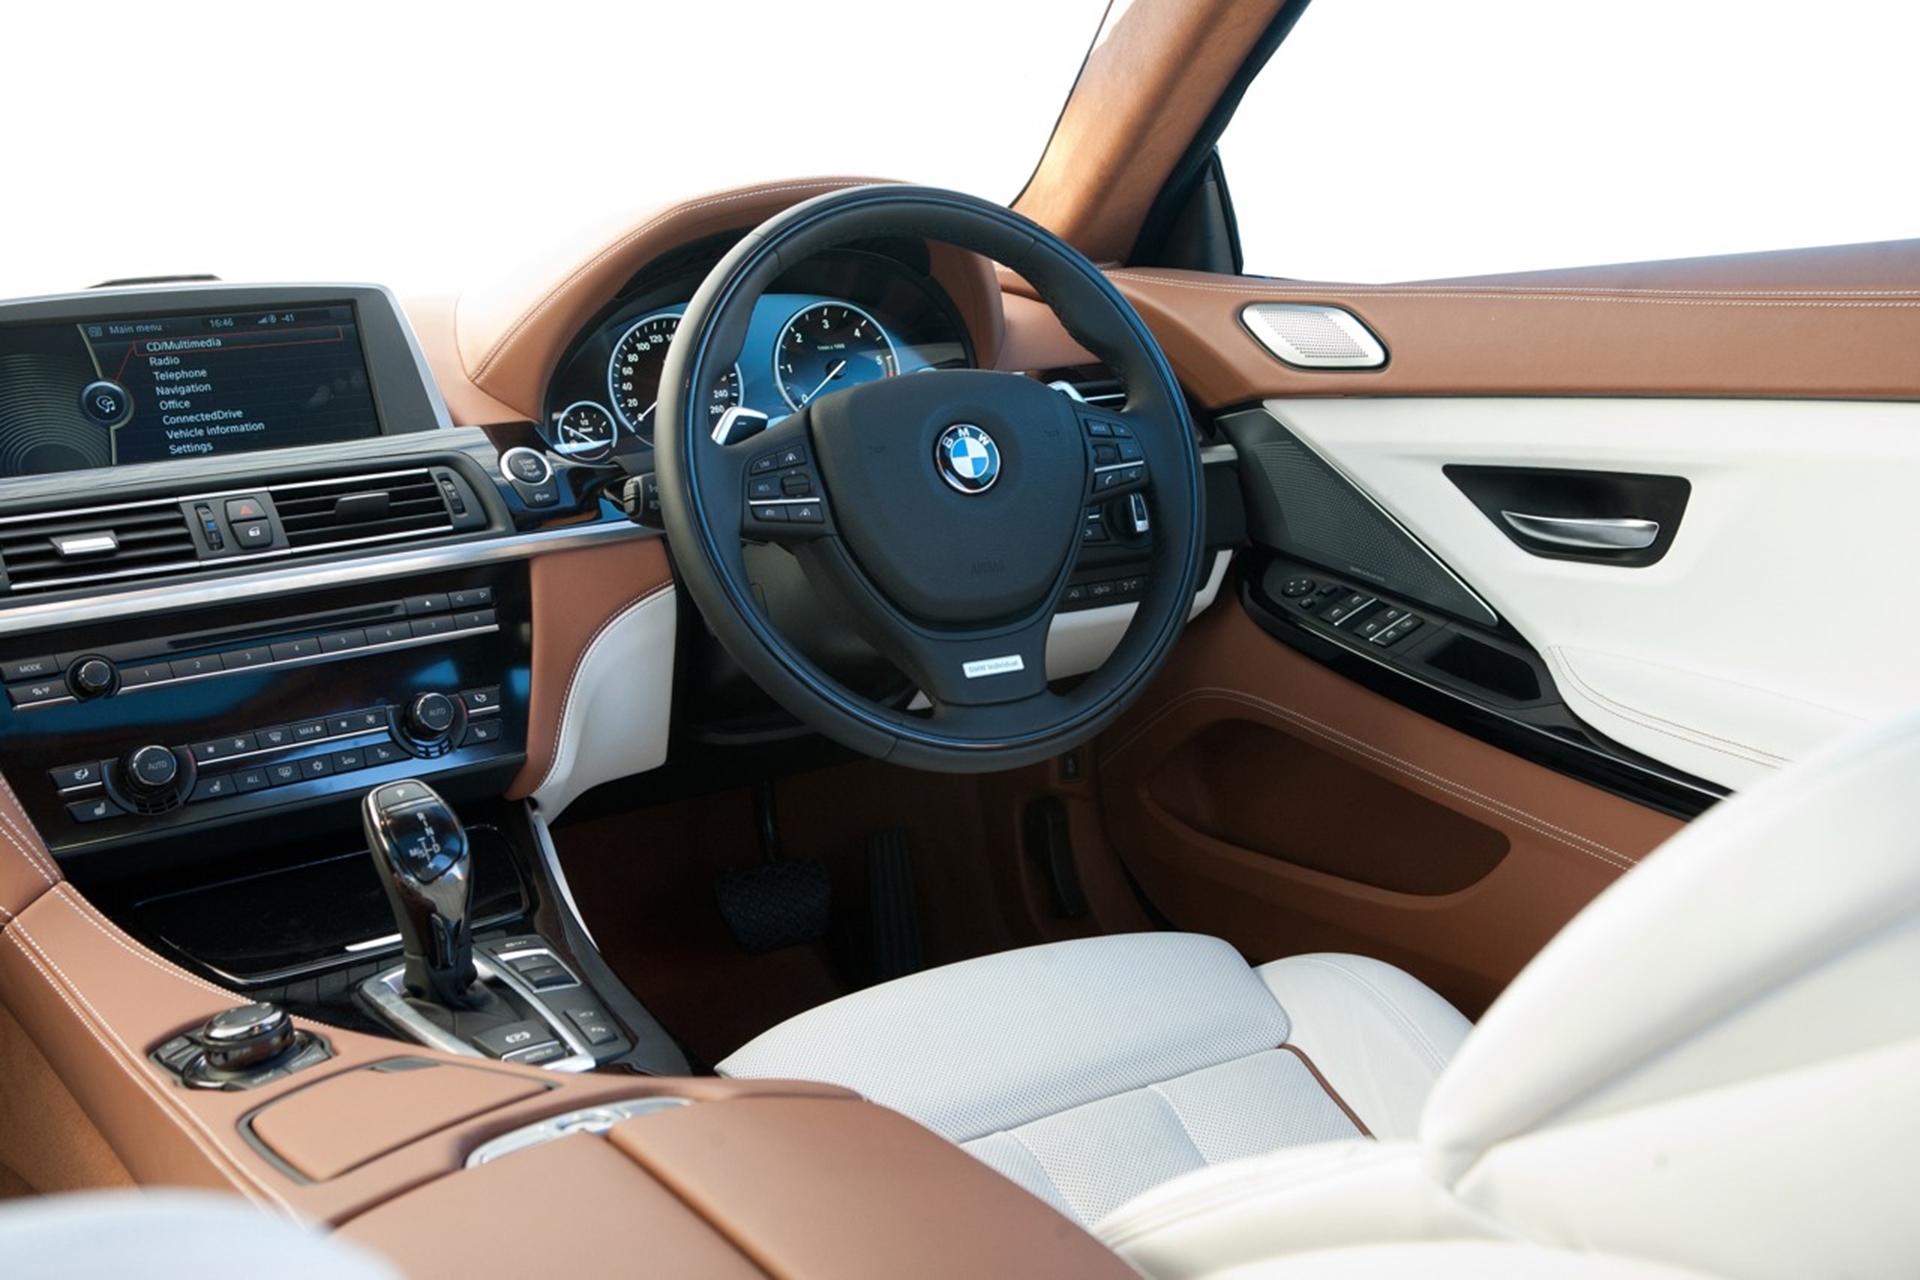 BMW ConnectedDrive in the BMW 6 Series Gran Coupe